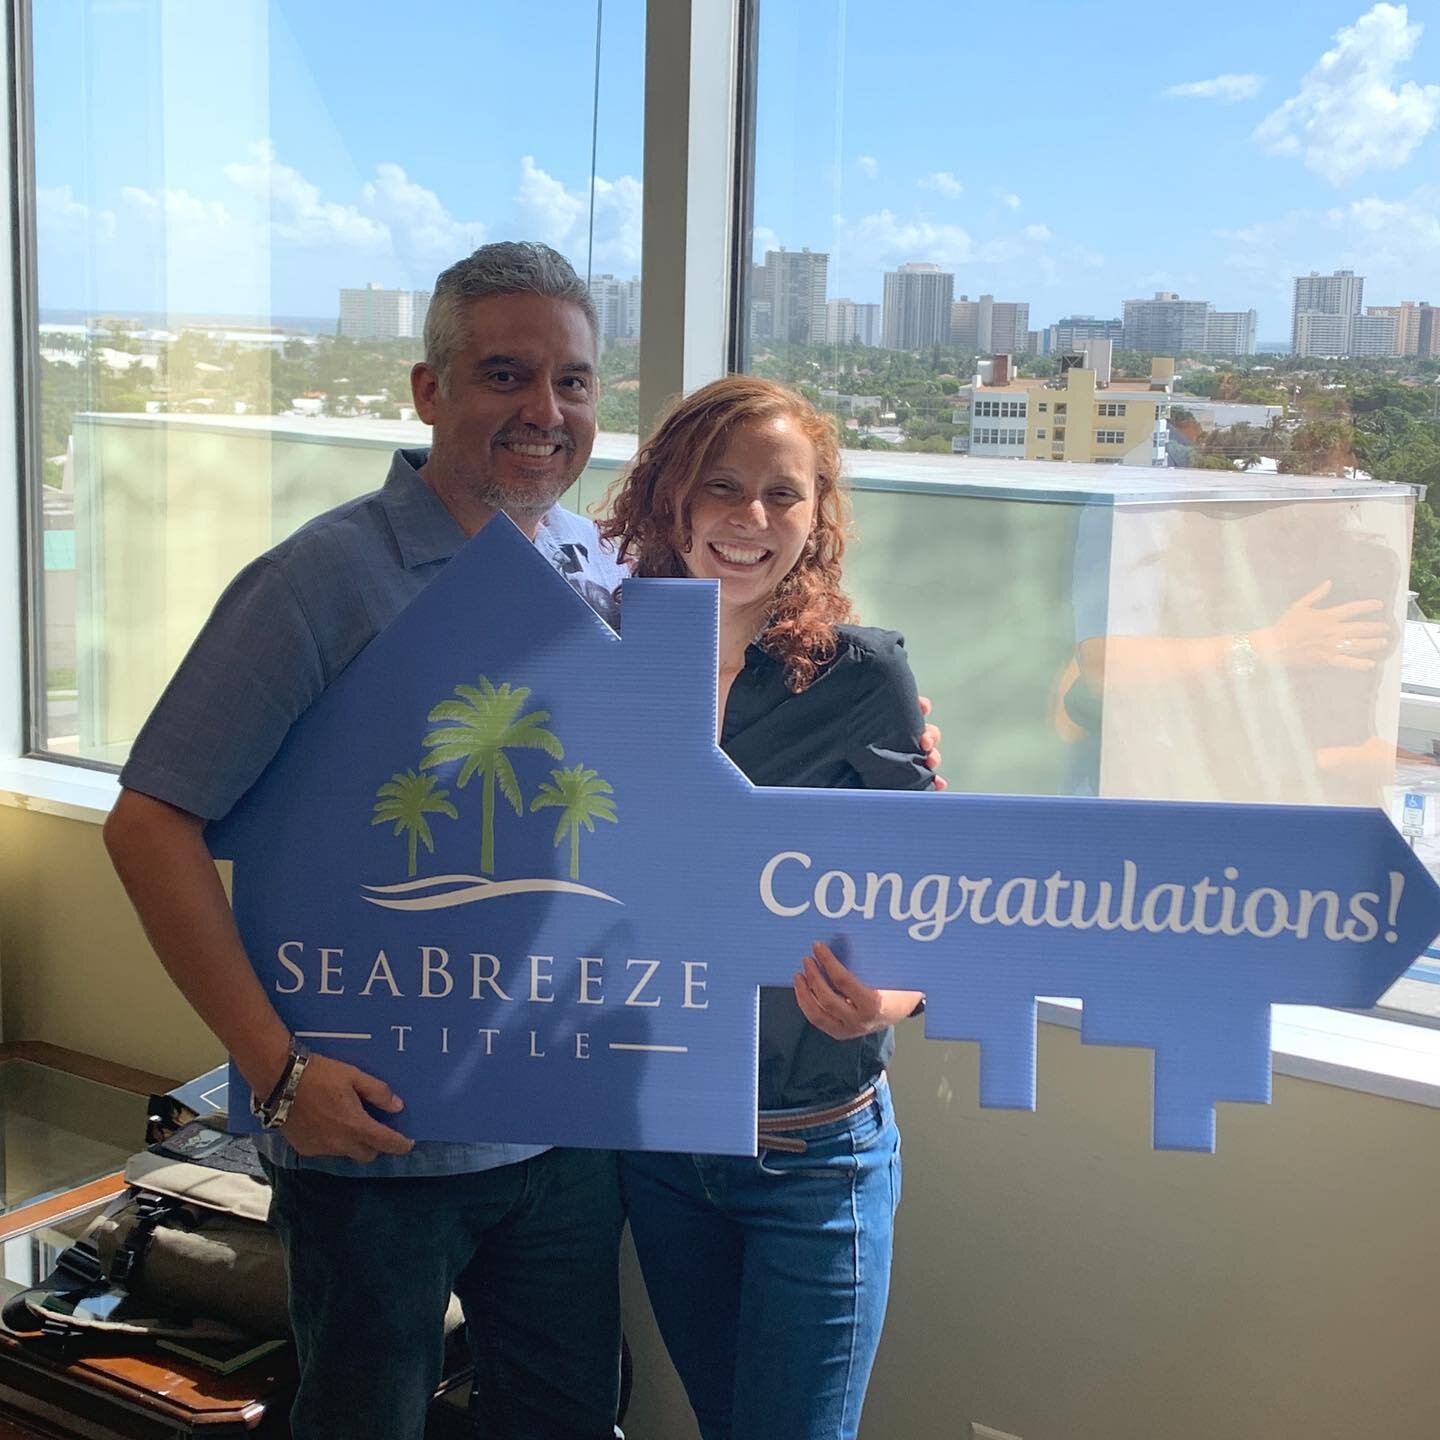 Congratulations on closing on your first home! @homesbytonyr #realestate #titlecompany #seabreezetitle #realtor